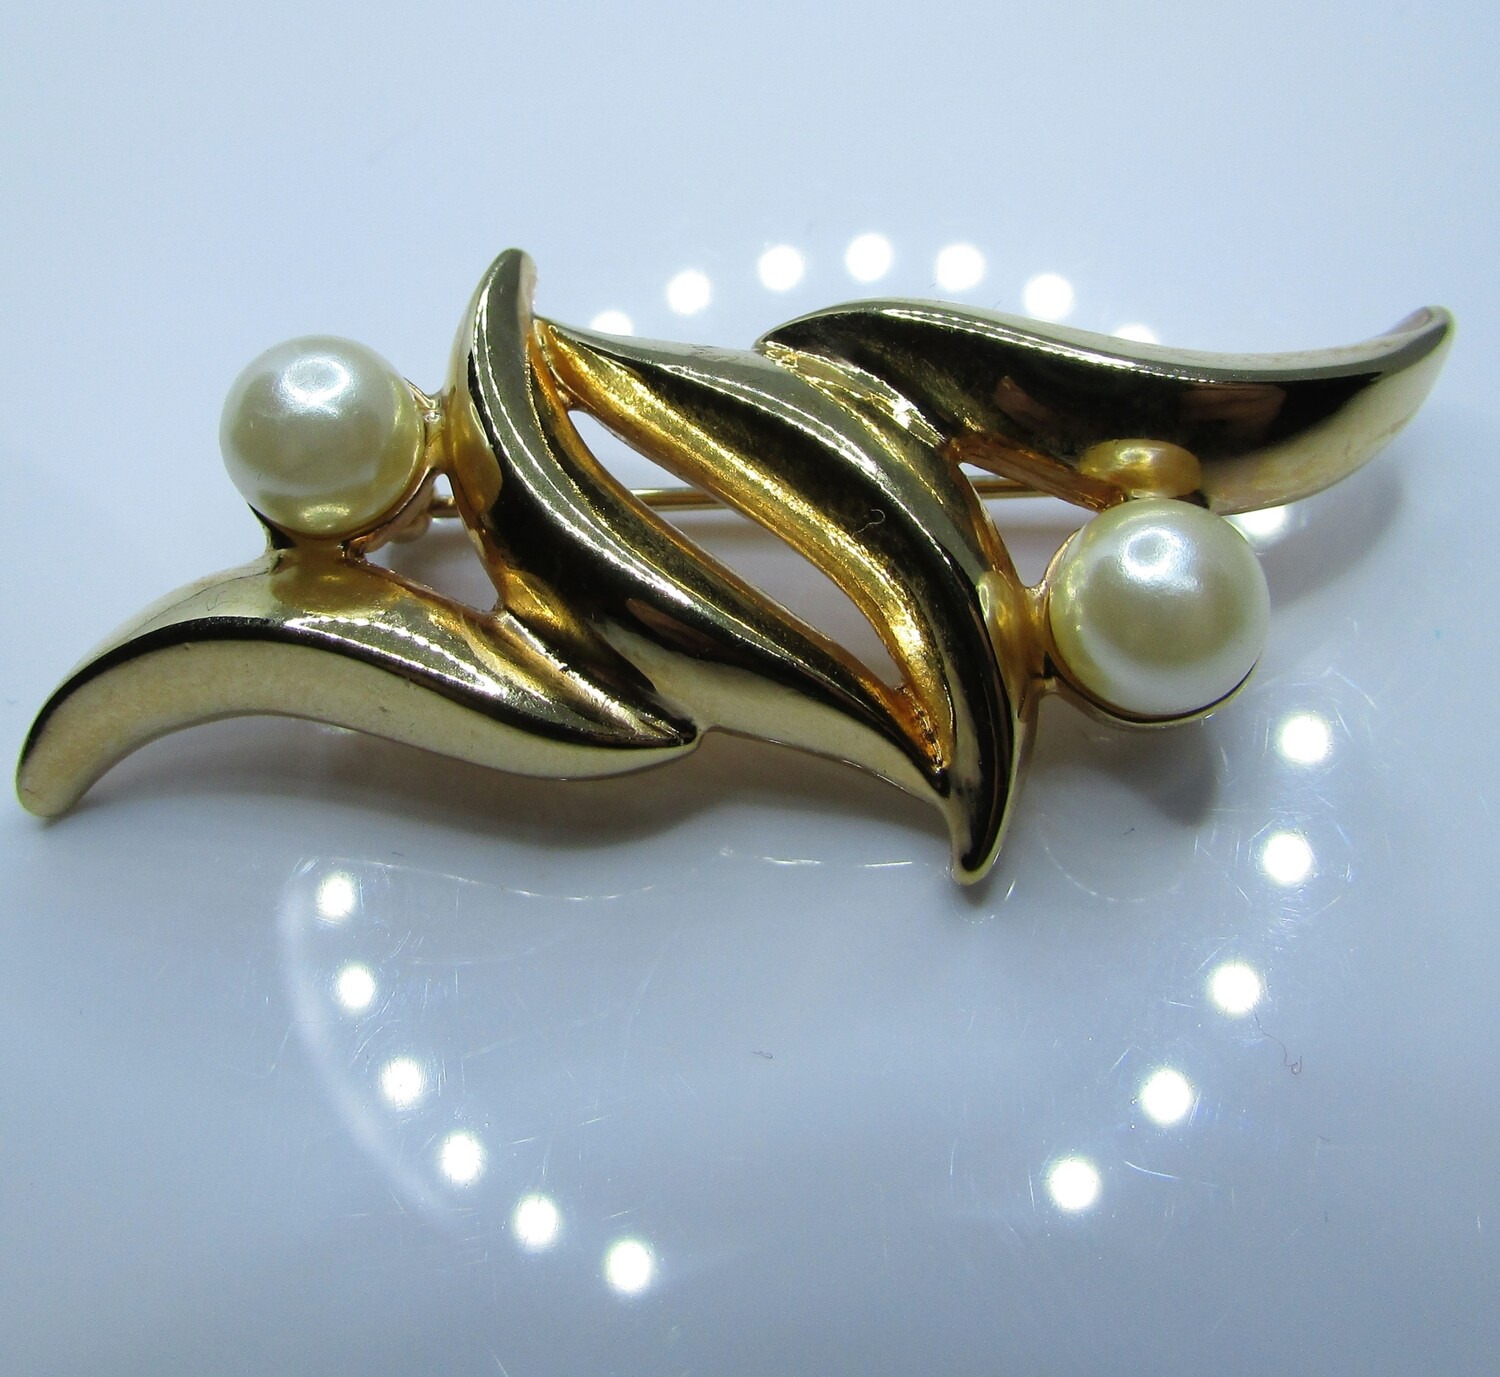 Keyes's Gold Plated Abstract Modernist Faux Pearl Brooch c. 1960's